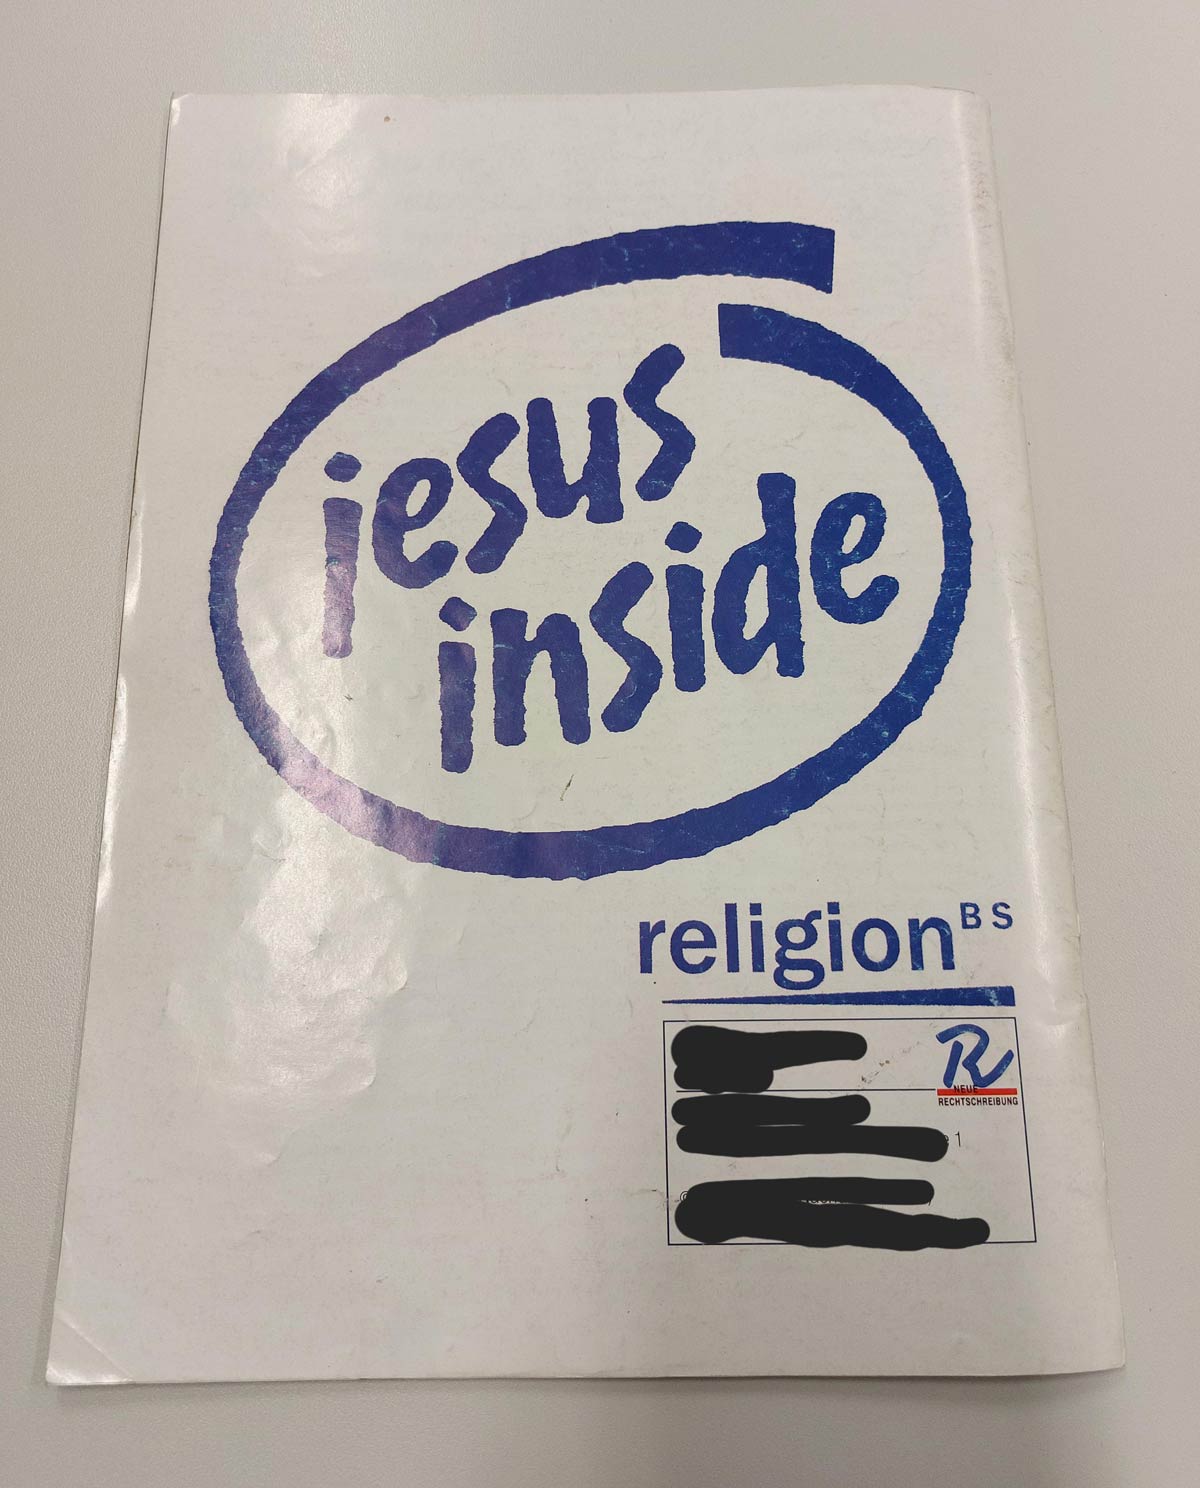 The religion book in our IT-School